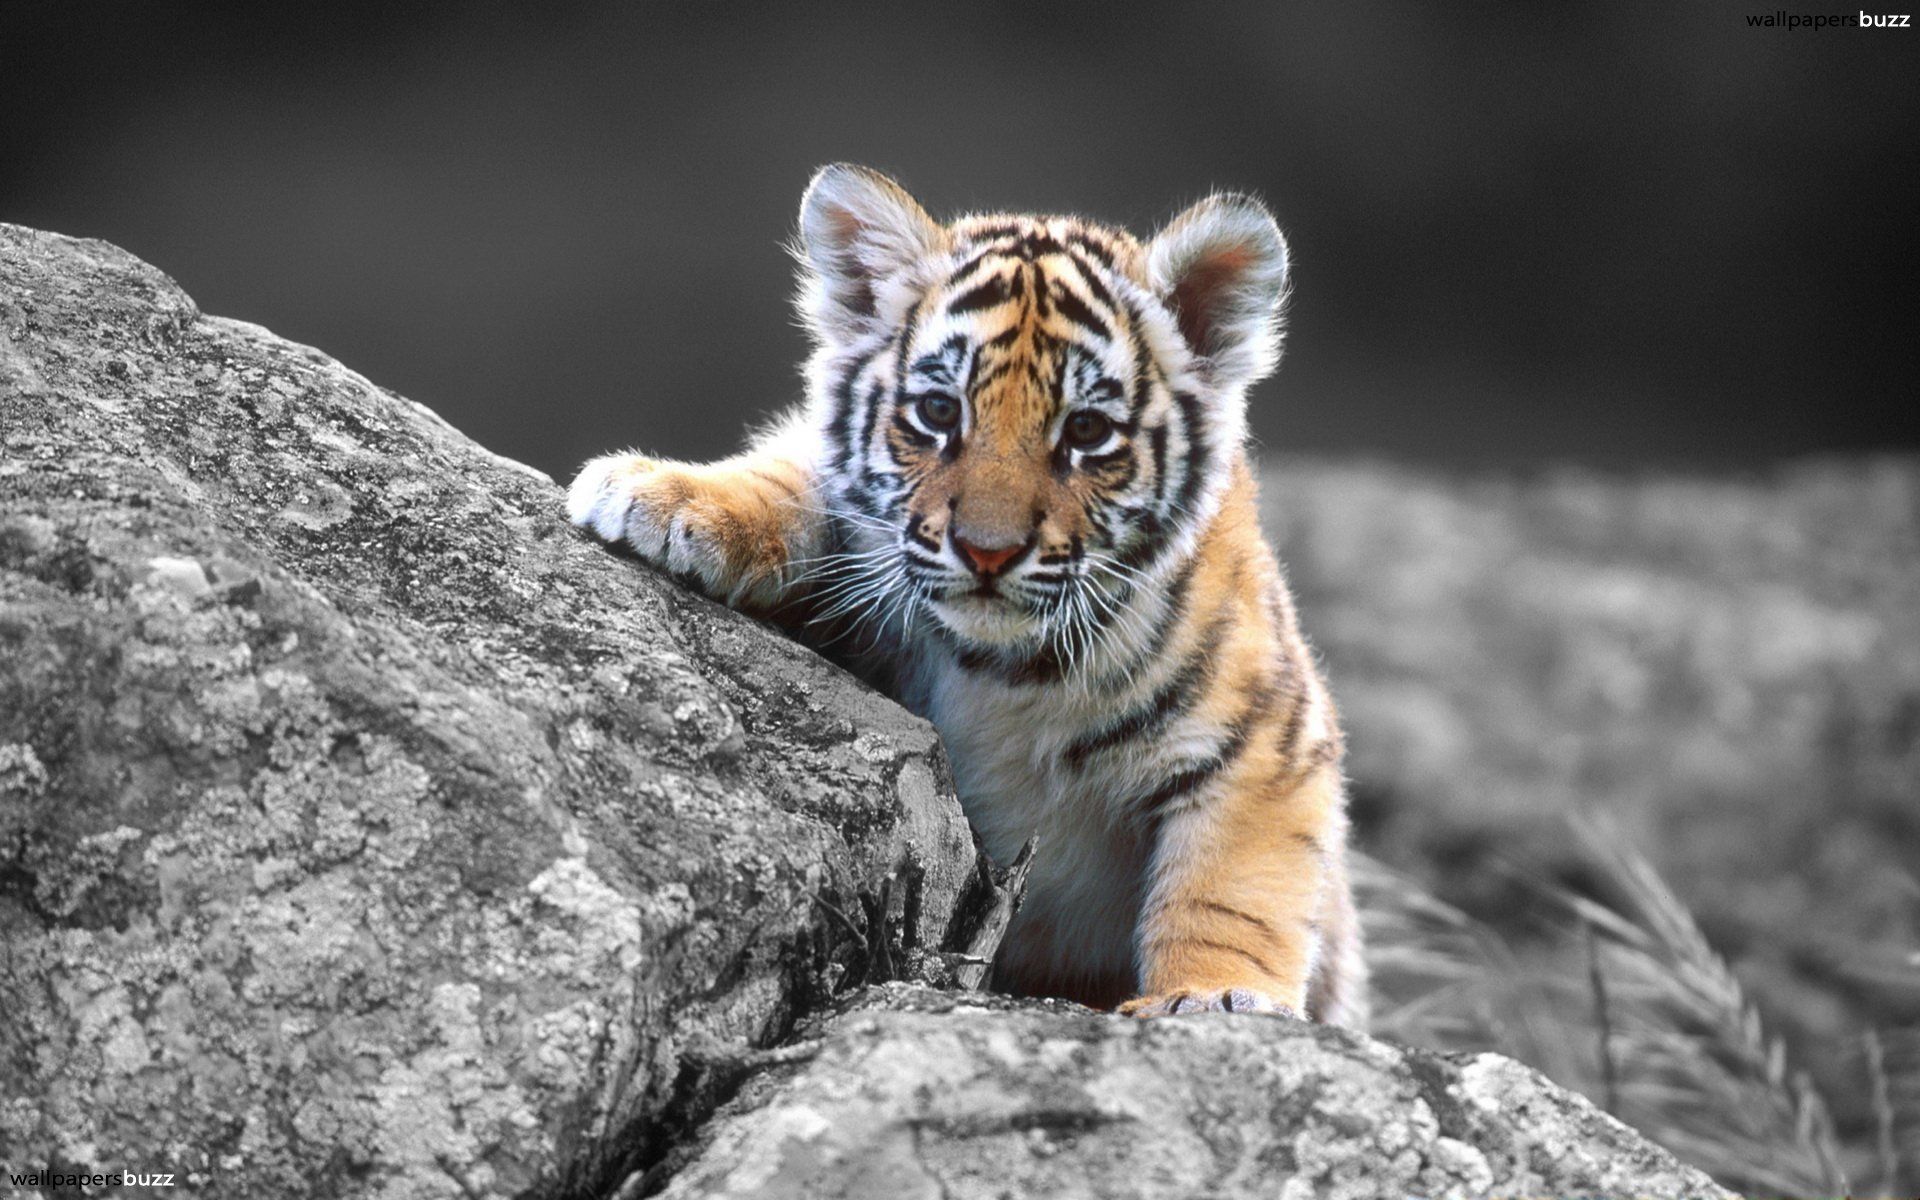 Tiger Wallpapers Hd Free Download - Widescreen HD Wallpapers